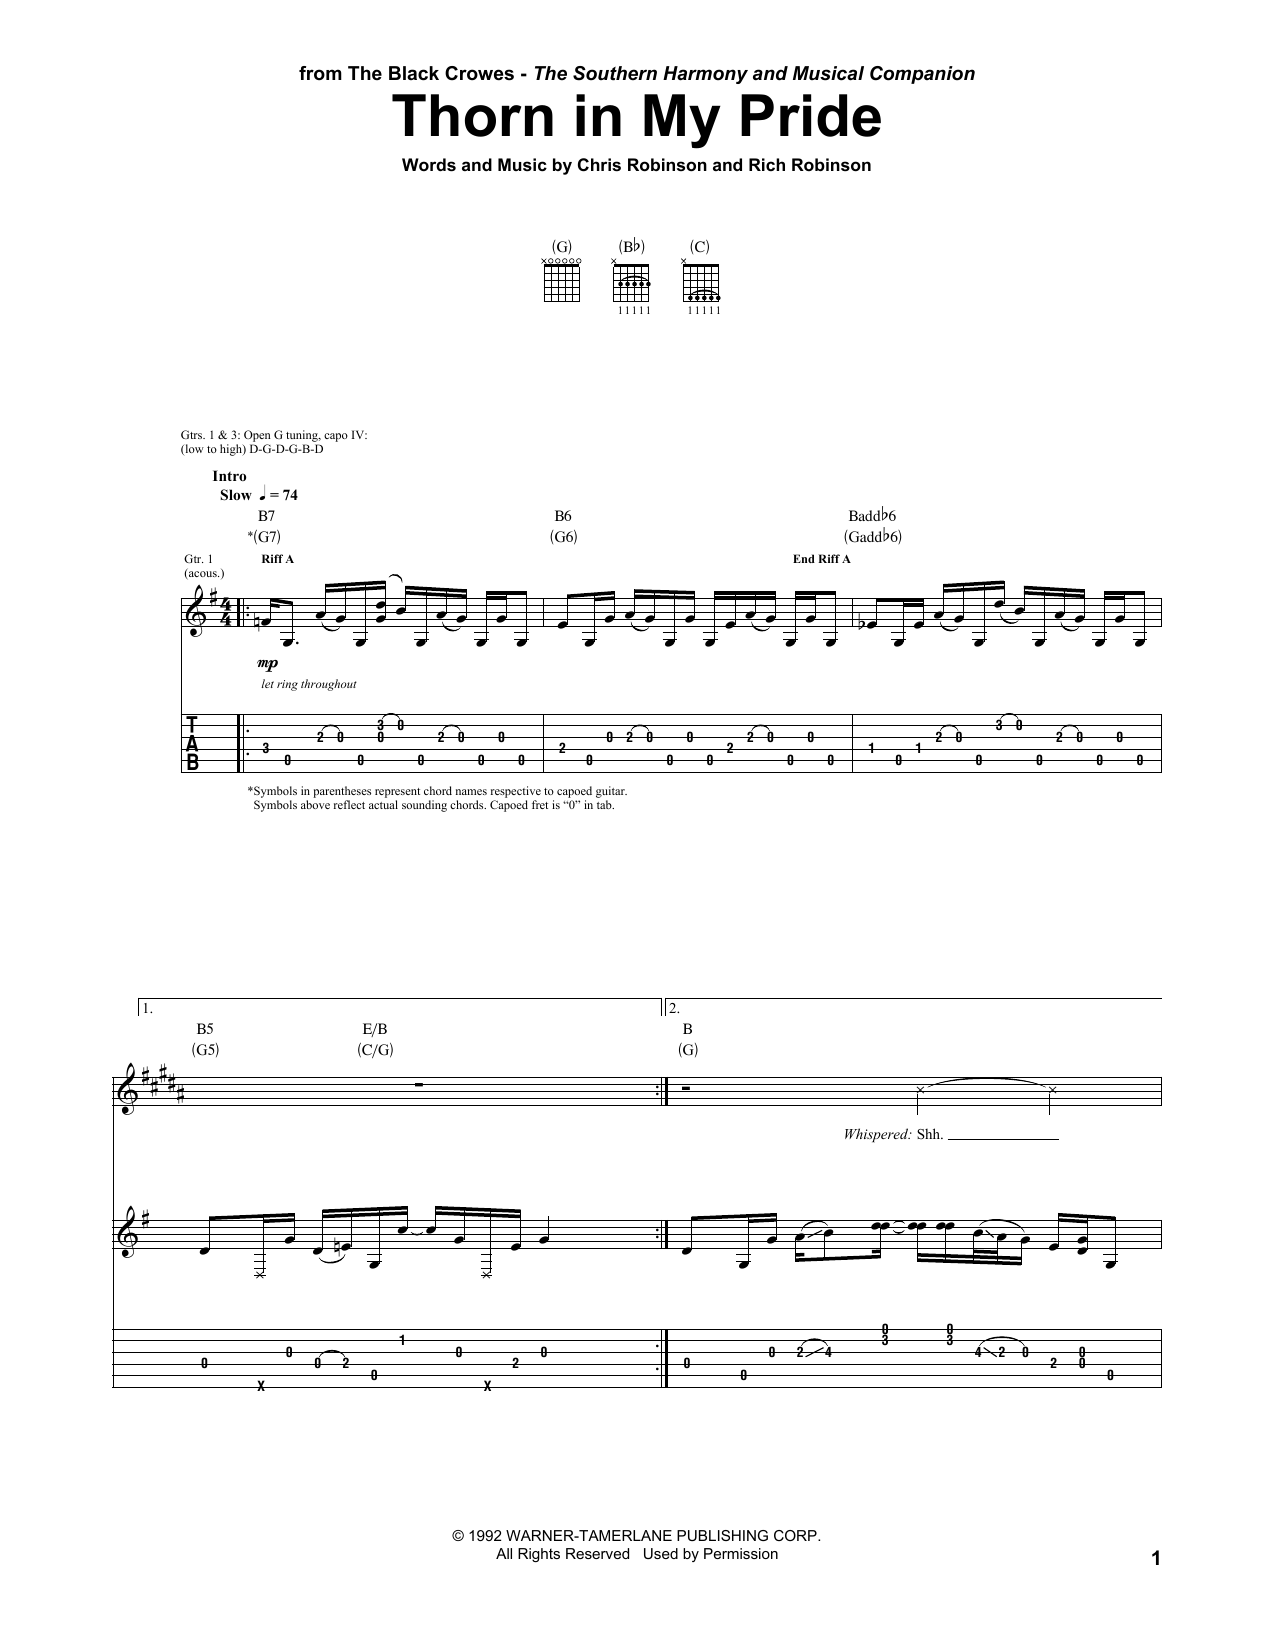 Download The Black Crowes Thorn In My Pride Sheet Music